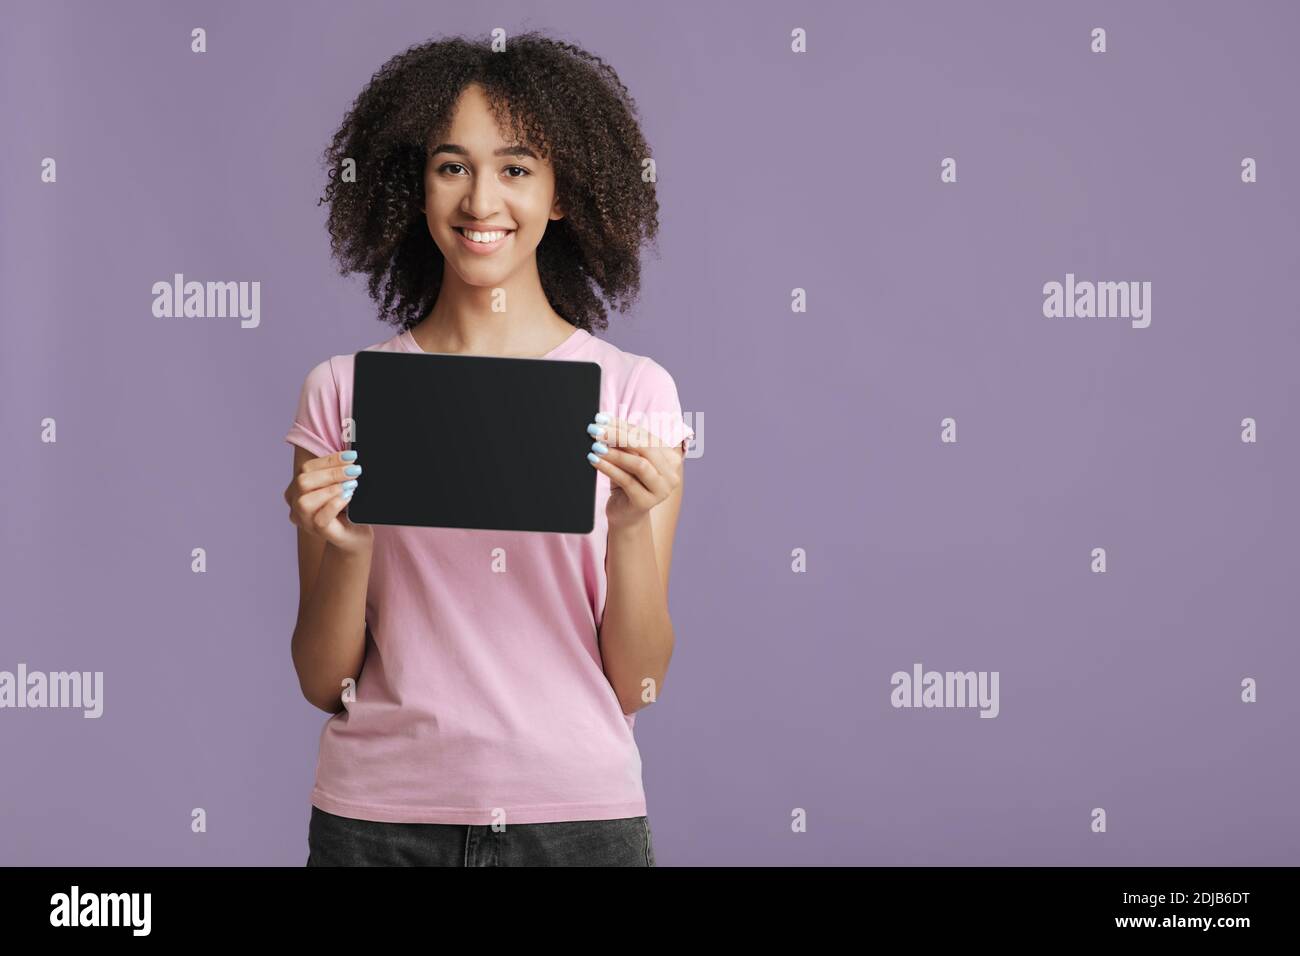 Reviews, offers and online application. Happy female shows tablet with blank screen Stock Photo